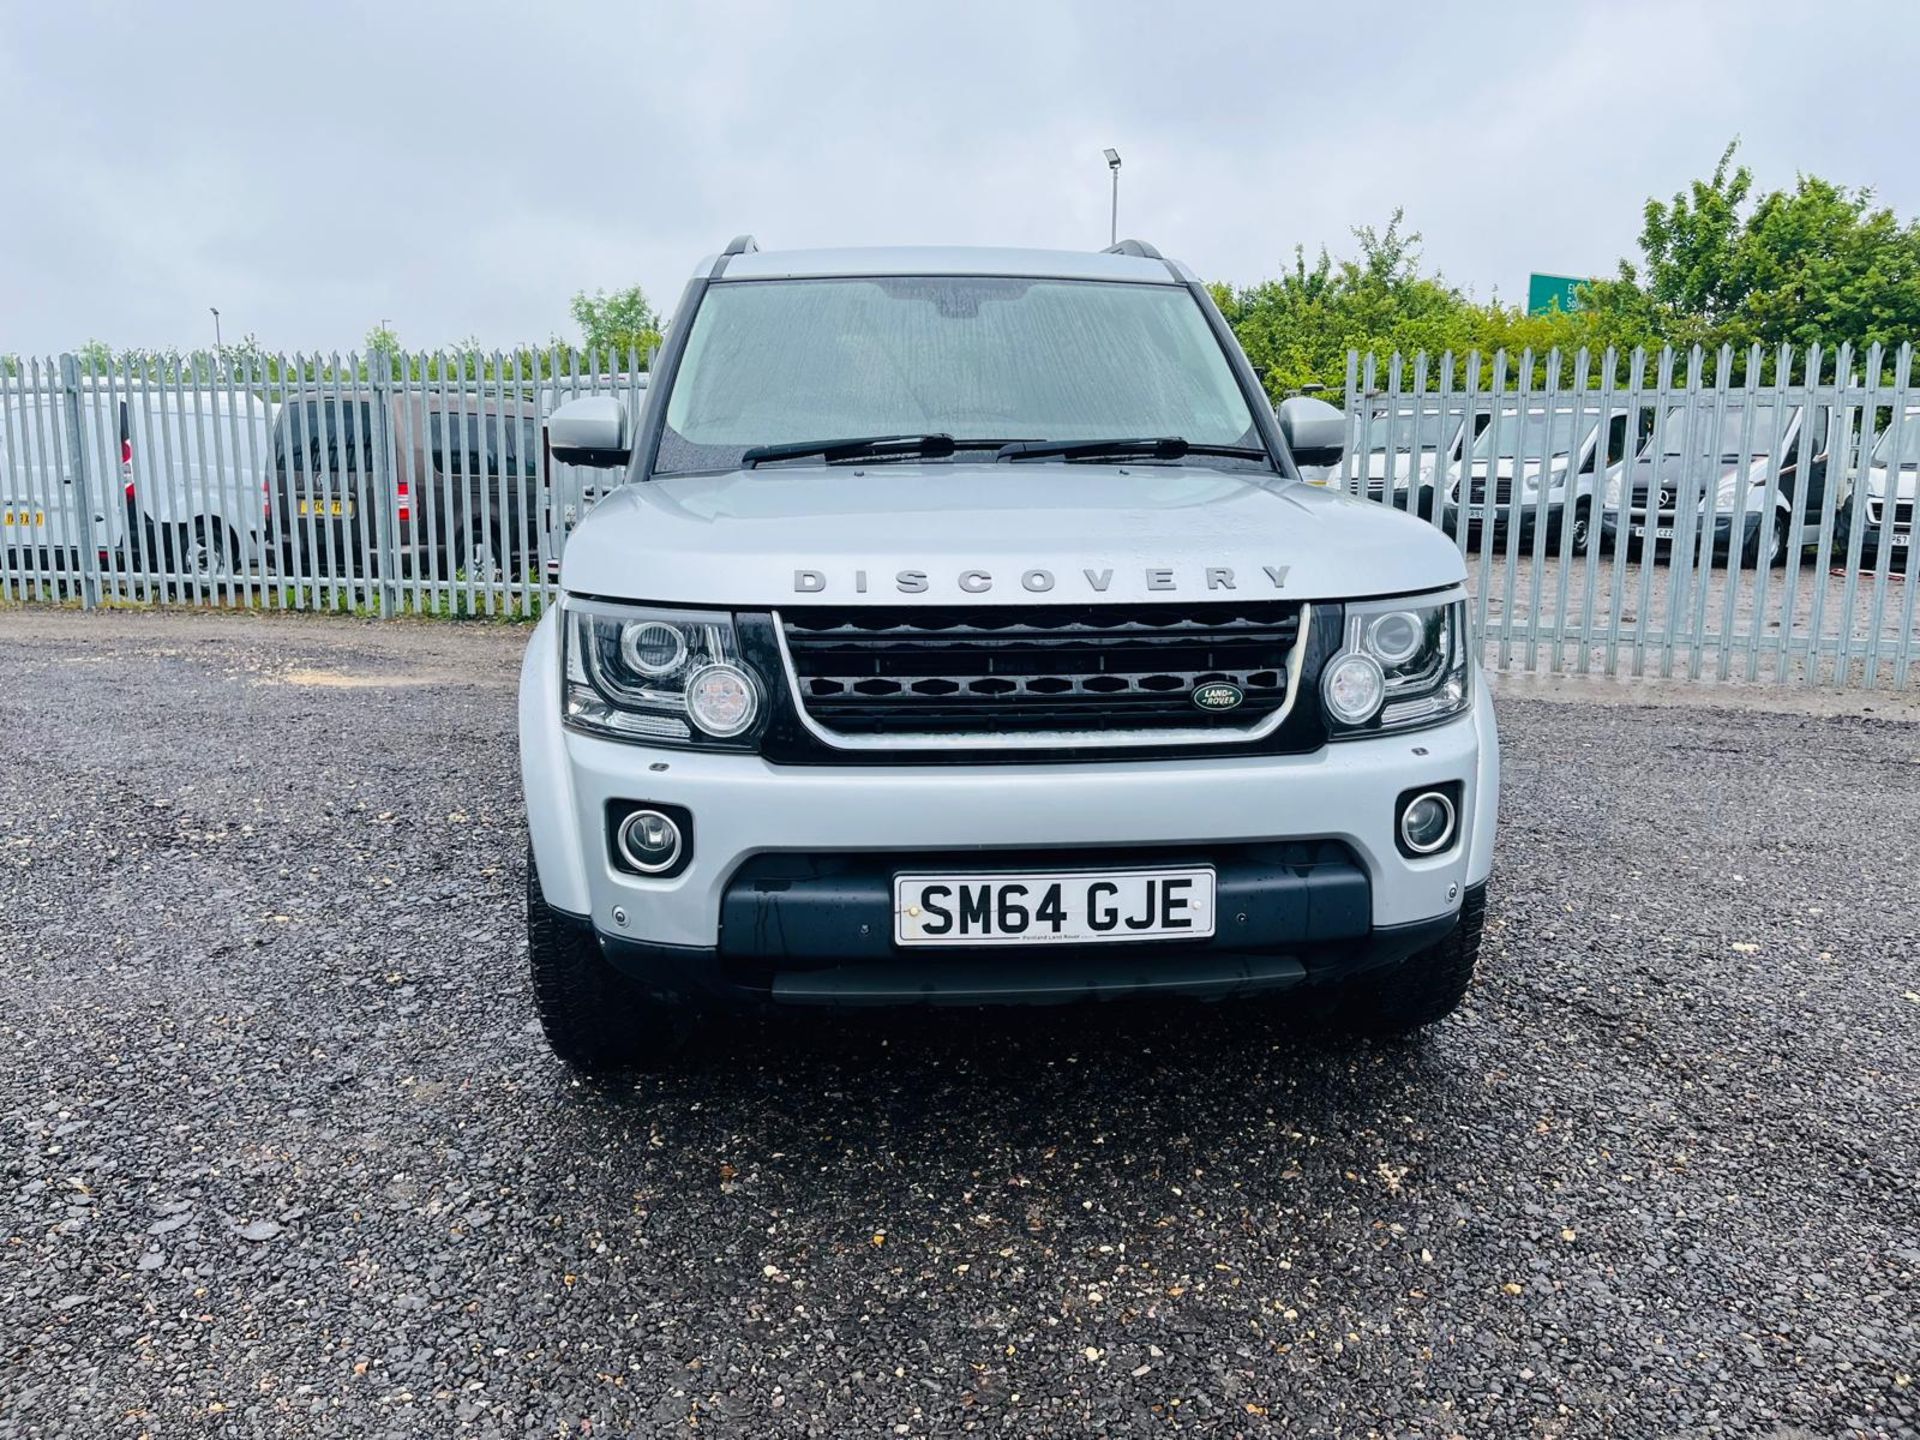 ** ON SALE ** Land Rover Discovery 4 3.0 SD V6 255 2014 '64 Reg' - A/C - Alloy Wheels - Tow Bar - Image 2 of 30